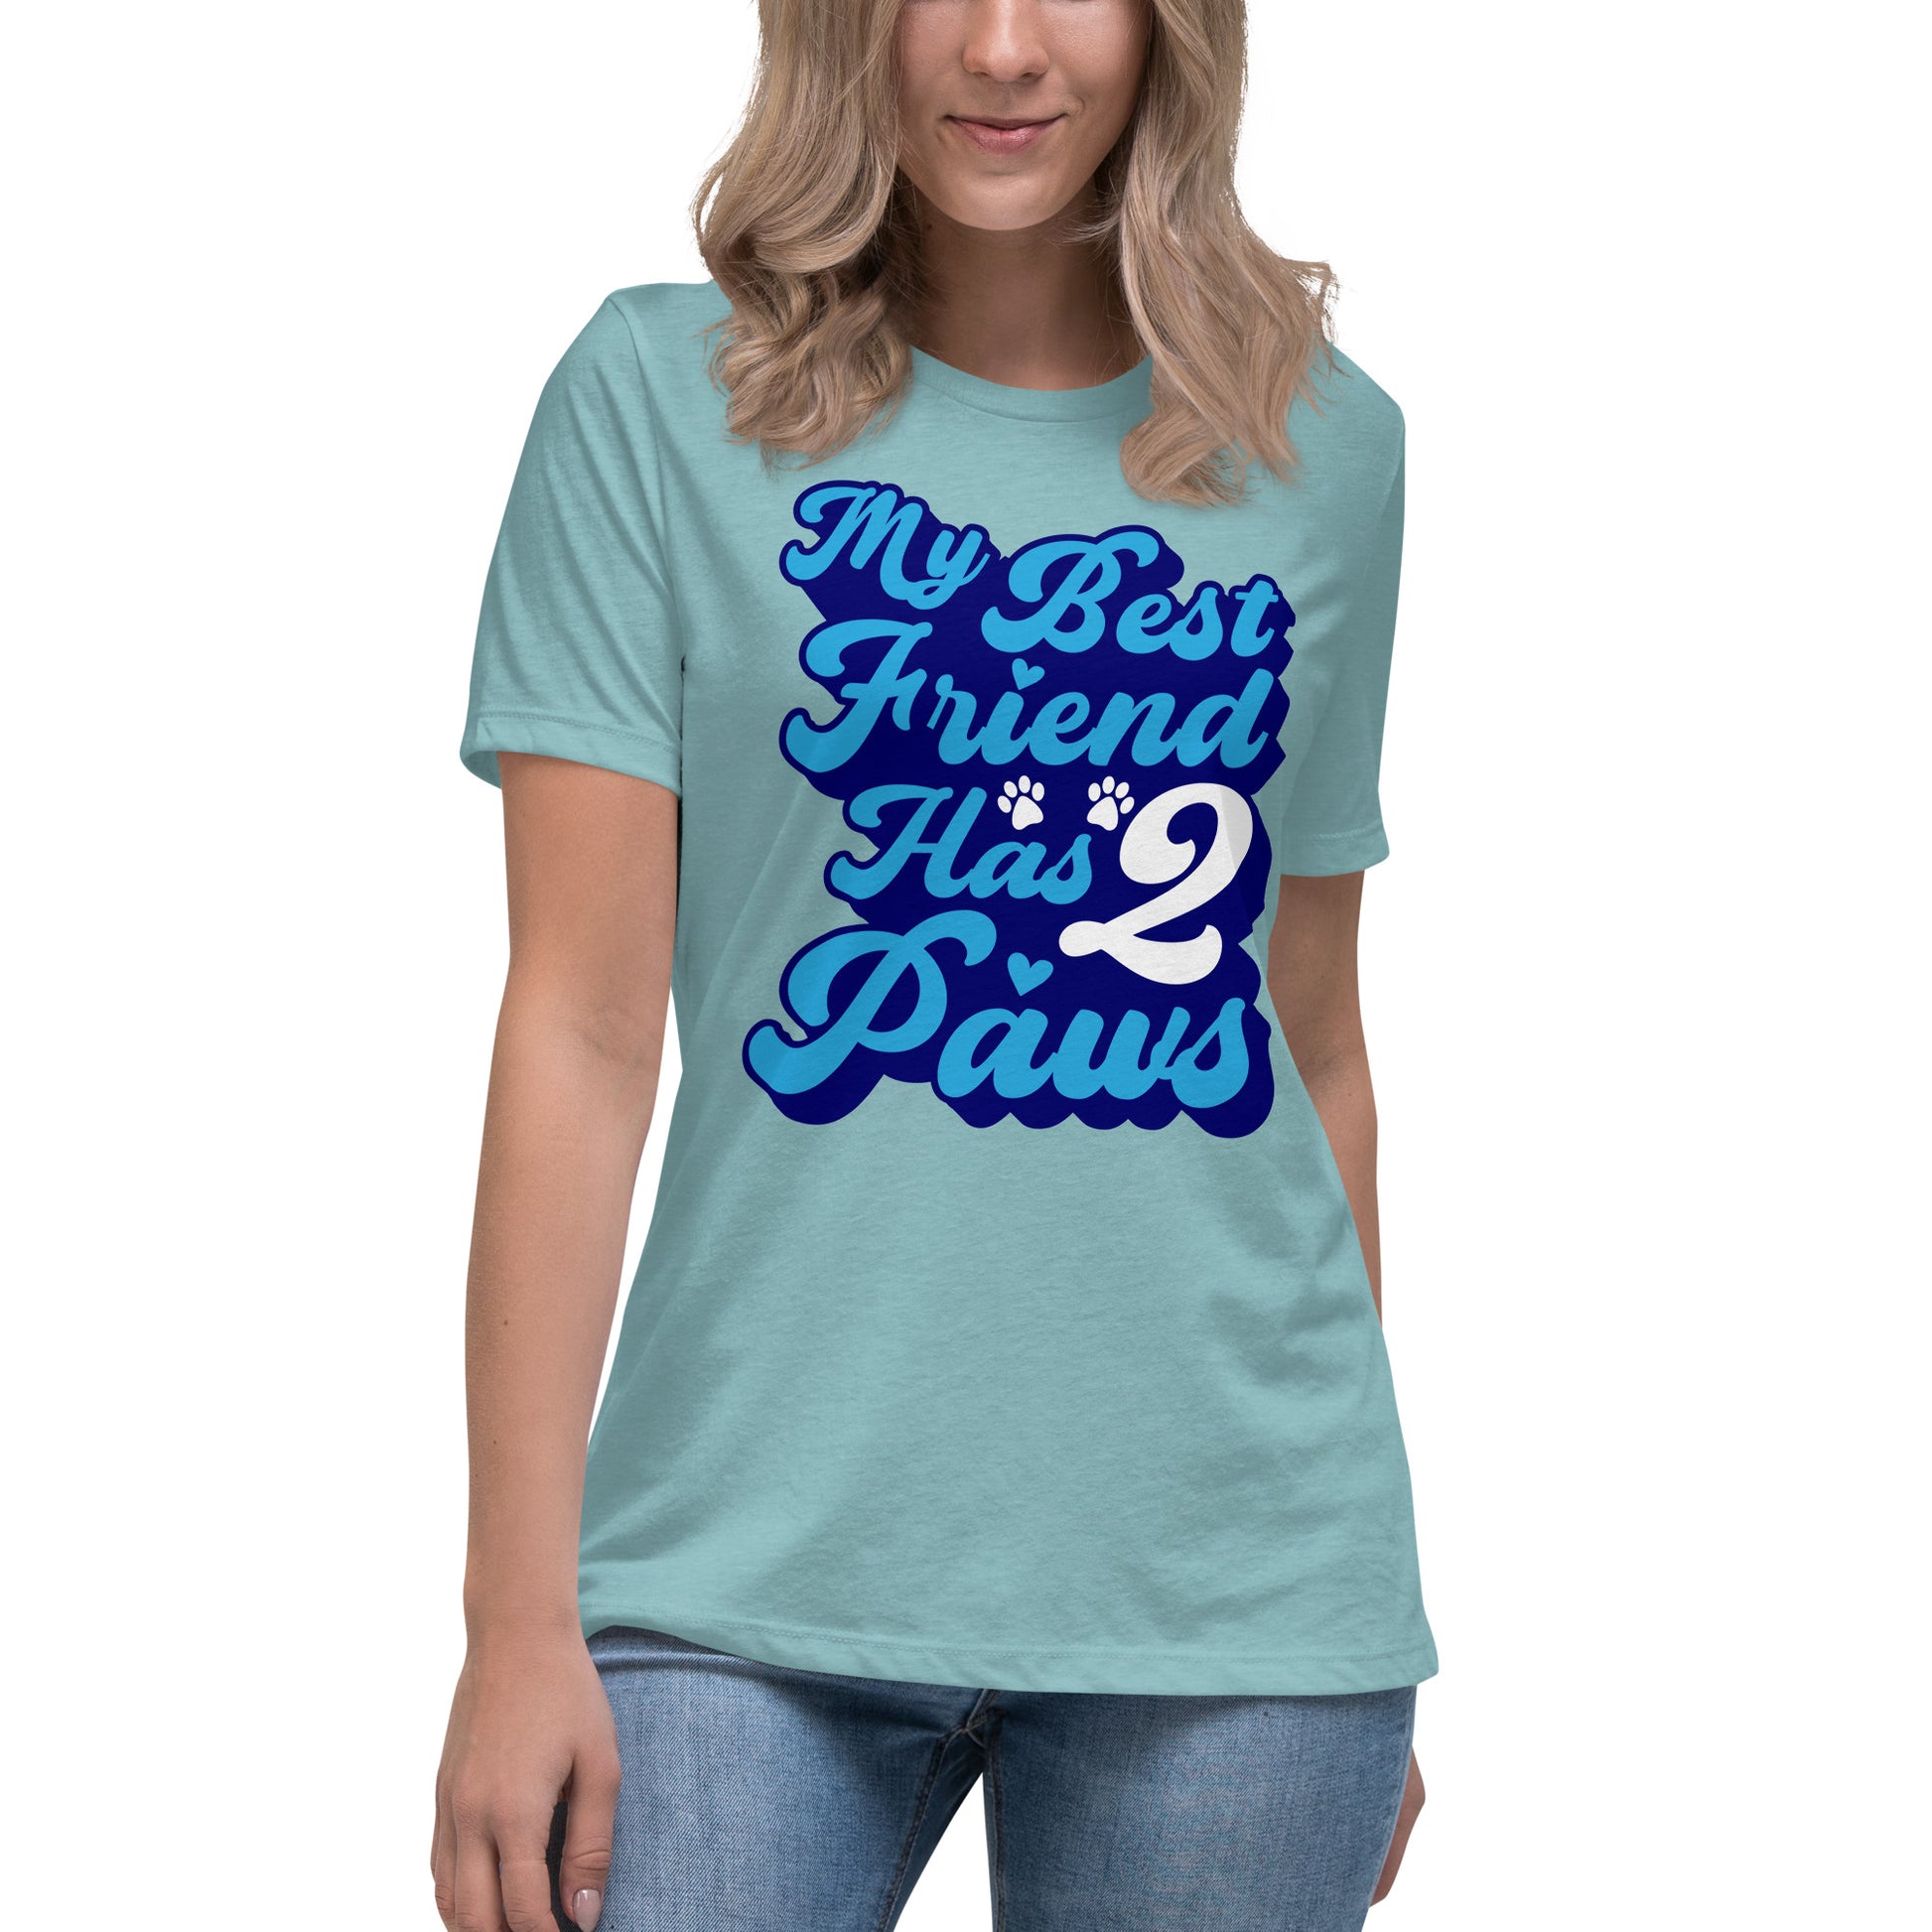 My best friend has 2 Paws women’s relaxed fit t-shirts by Dog Artistry blue lagoon